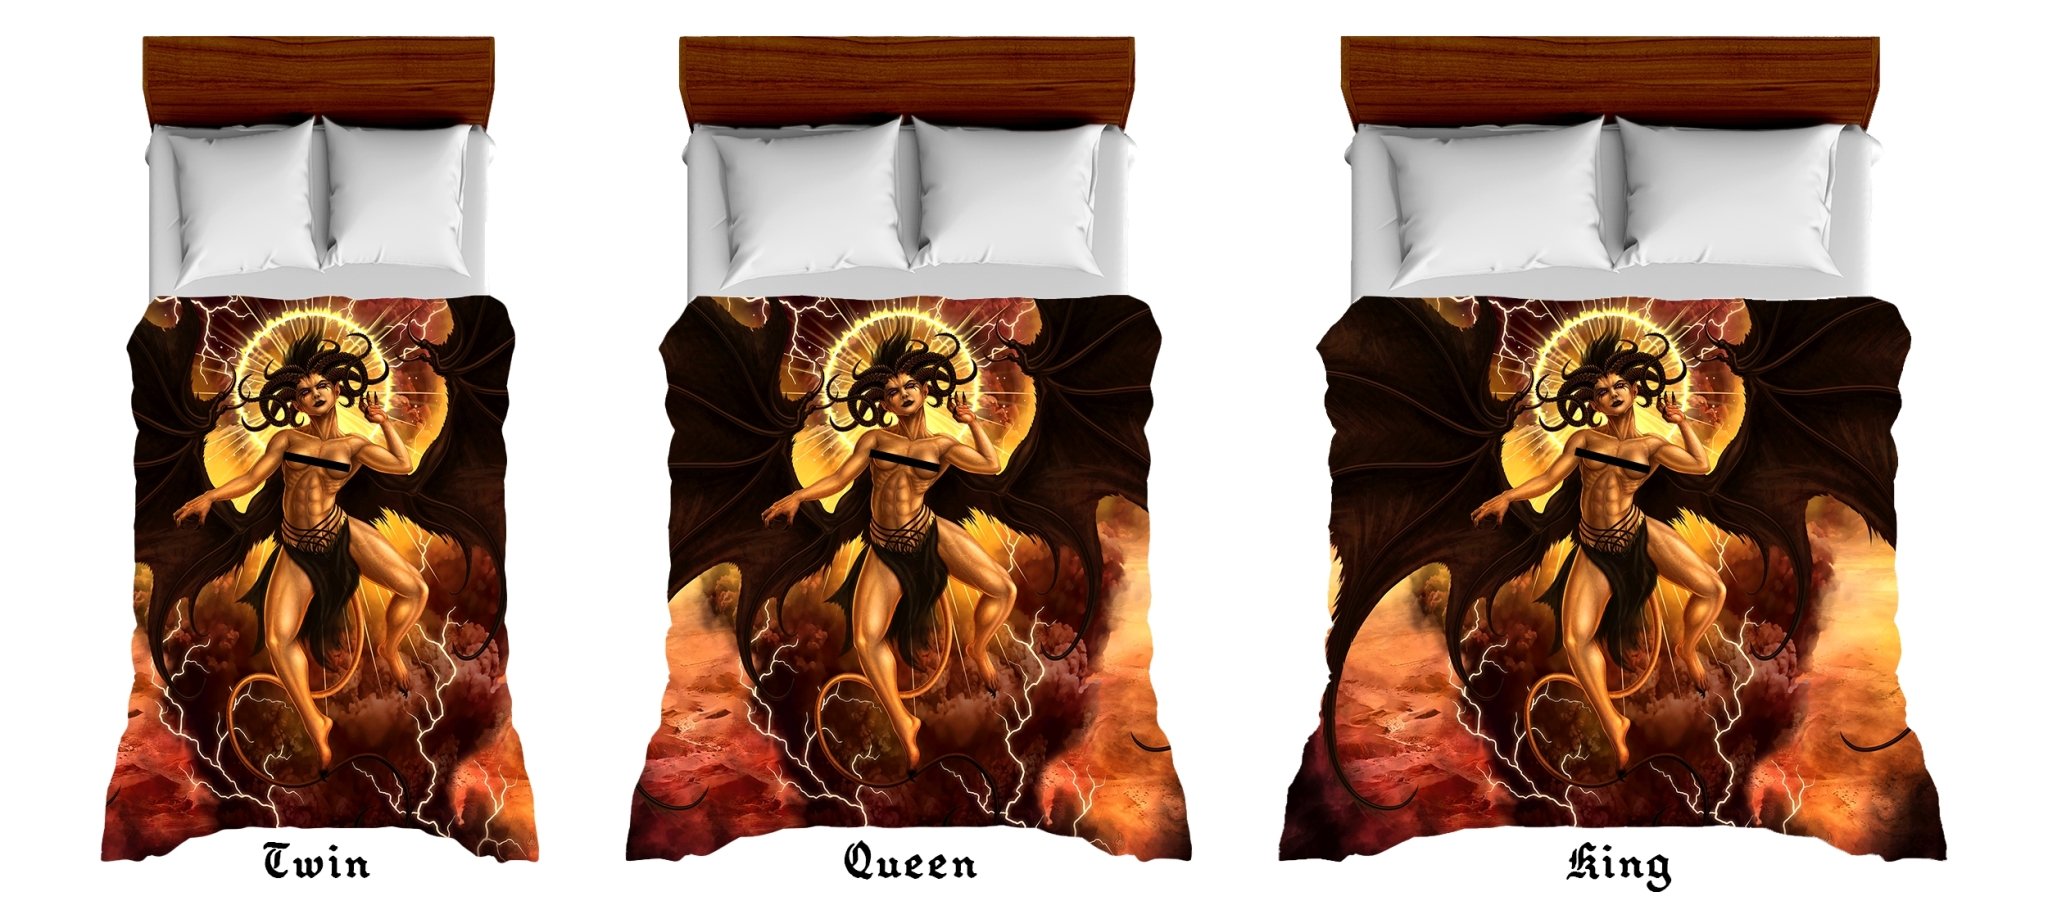 Lilith Bedding Set, Comforter or Duvet, Erotic Art, Satanic Room, Nude Demoness, Dark Bed Cover and Bedroom Decor, King, Queen & Twin Size - Clothed, Naked or Semi-Nude, 3 Versions - Abysm Internal